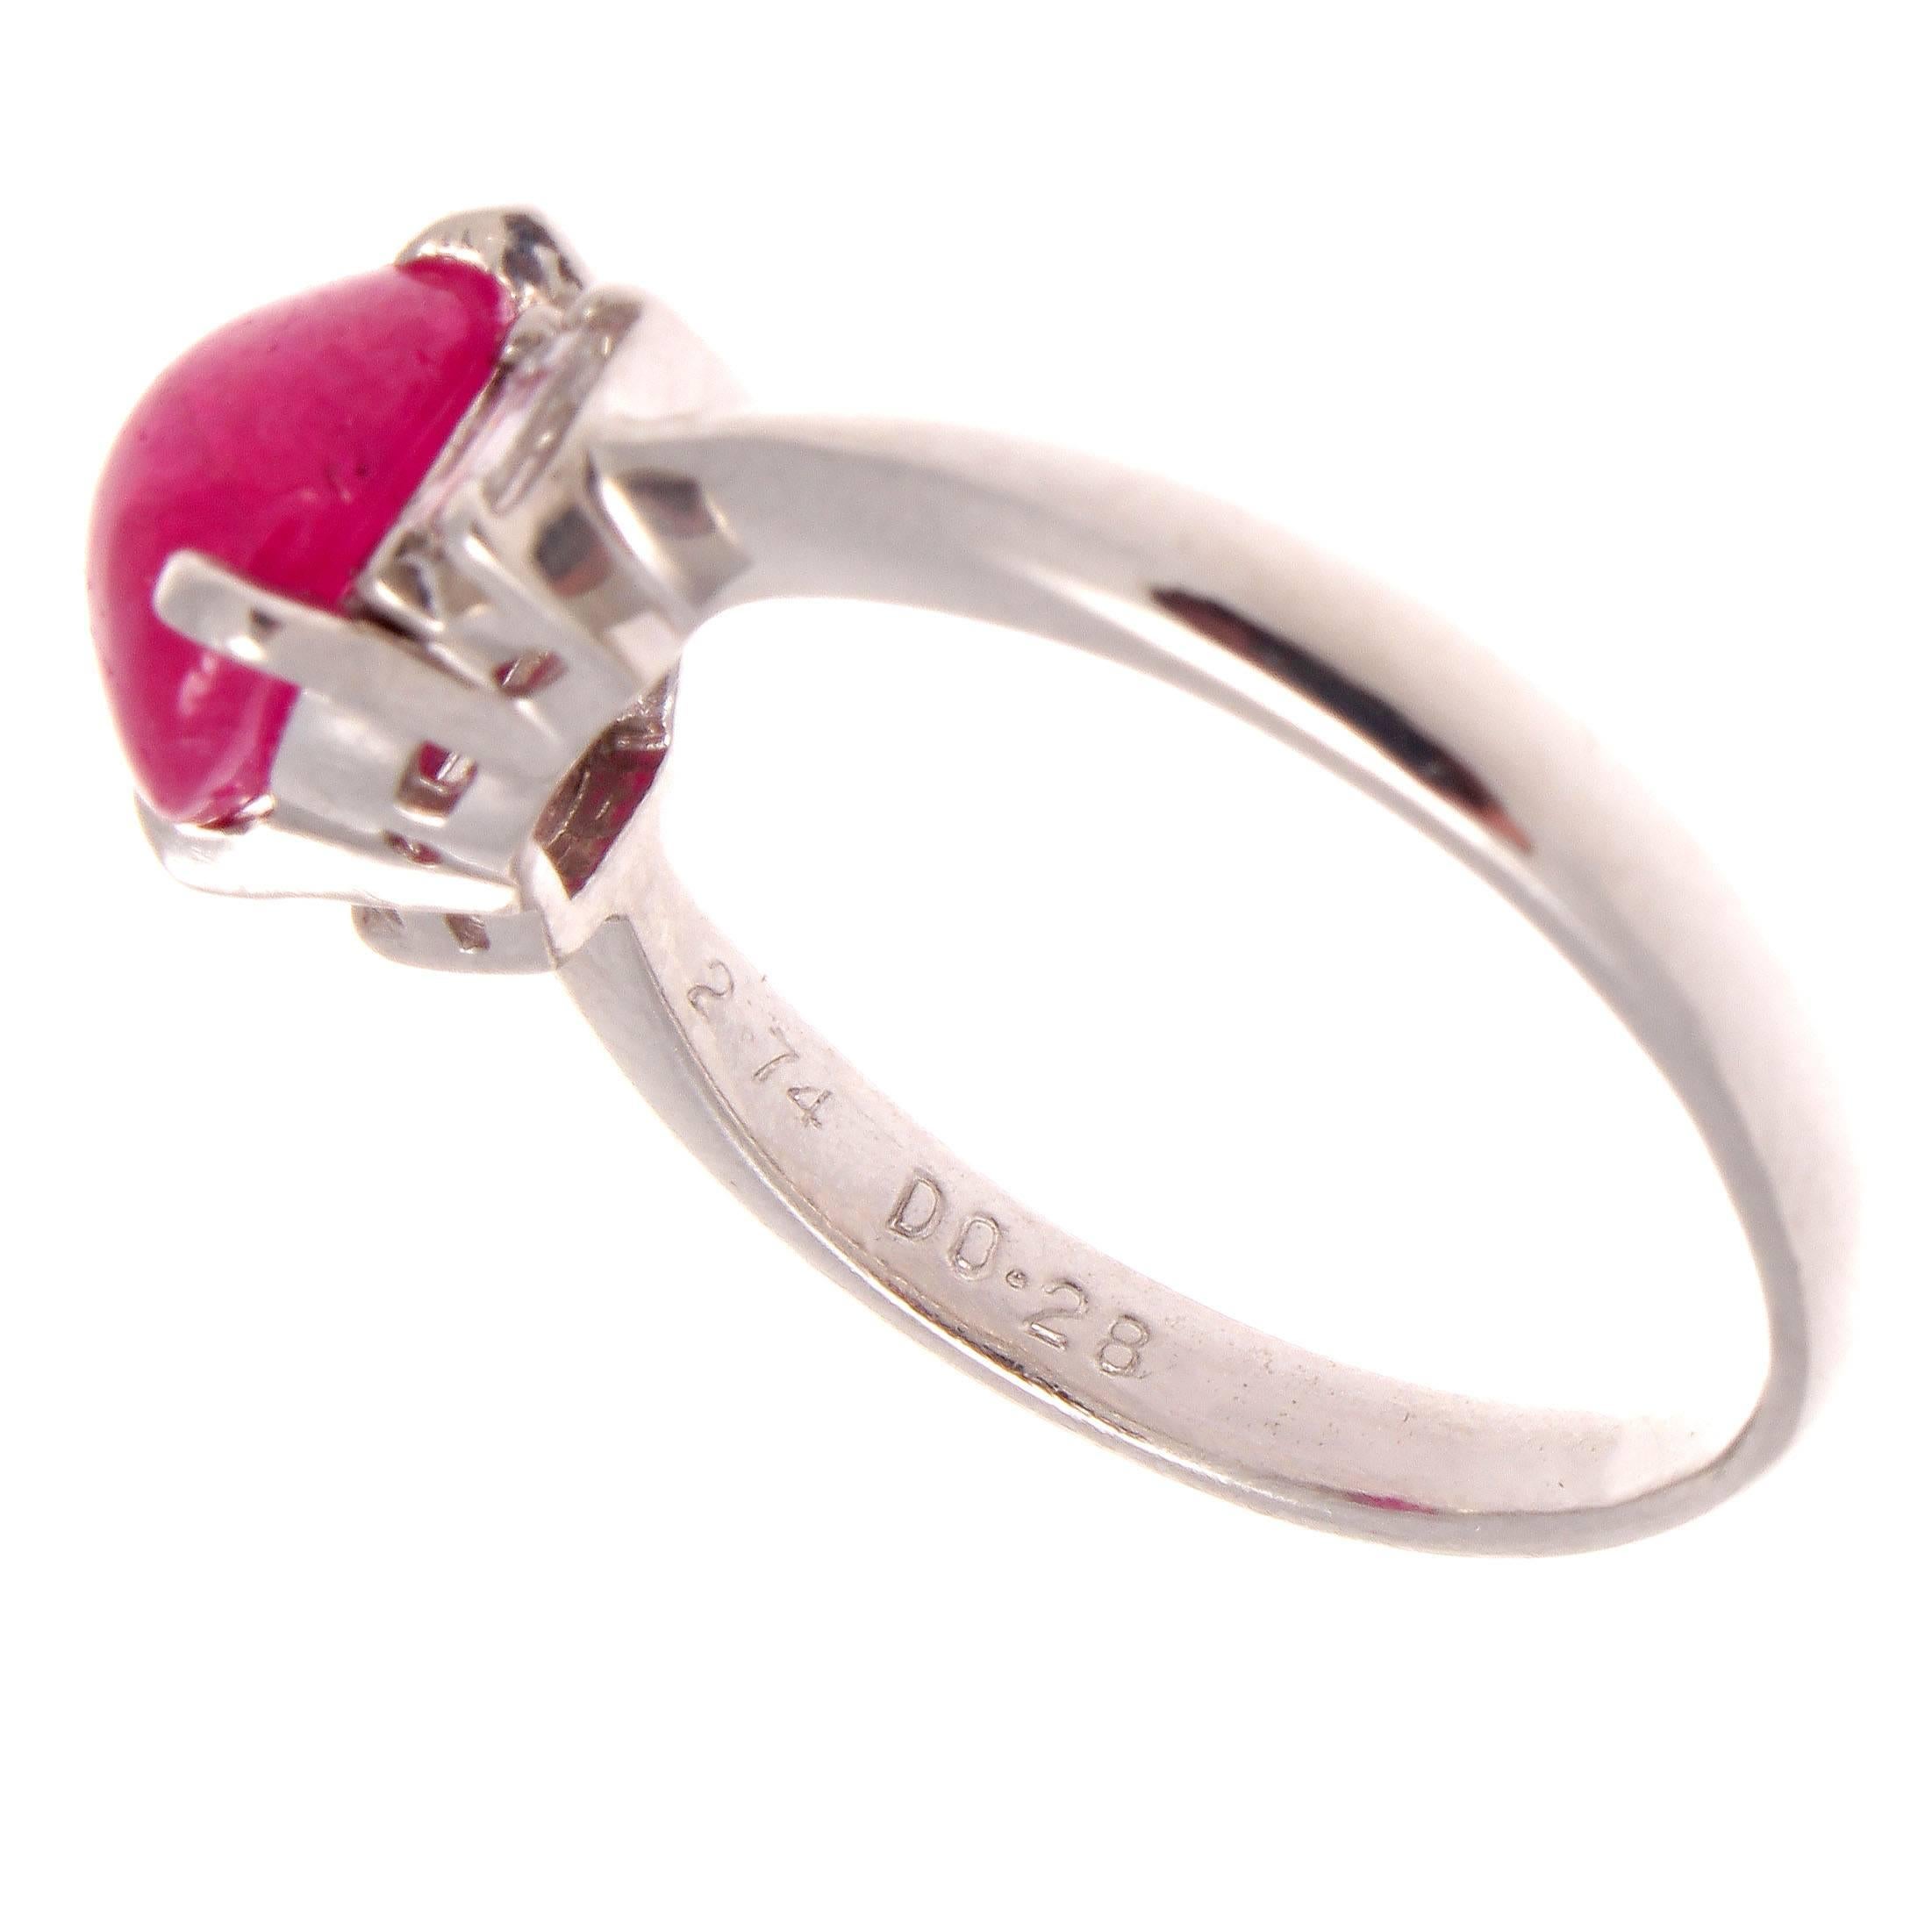 Leonardo da Vinci once said, simplicity is the ultimate sophistication. This ring expresses simplicity in a bright and beautiful manner. Featuring a 2.74 carat cabochon cut vibrant red ruby perfectly accented by two white, clean baguette cut